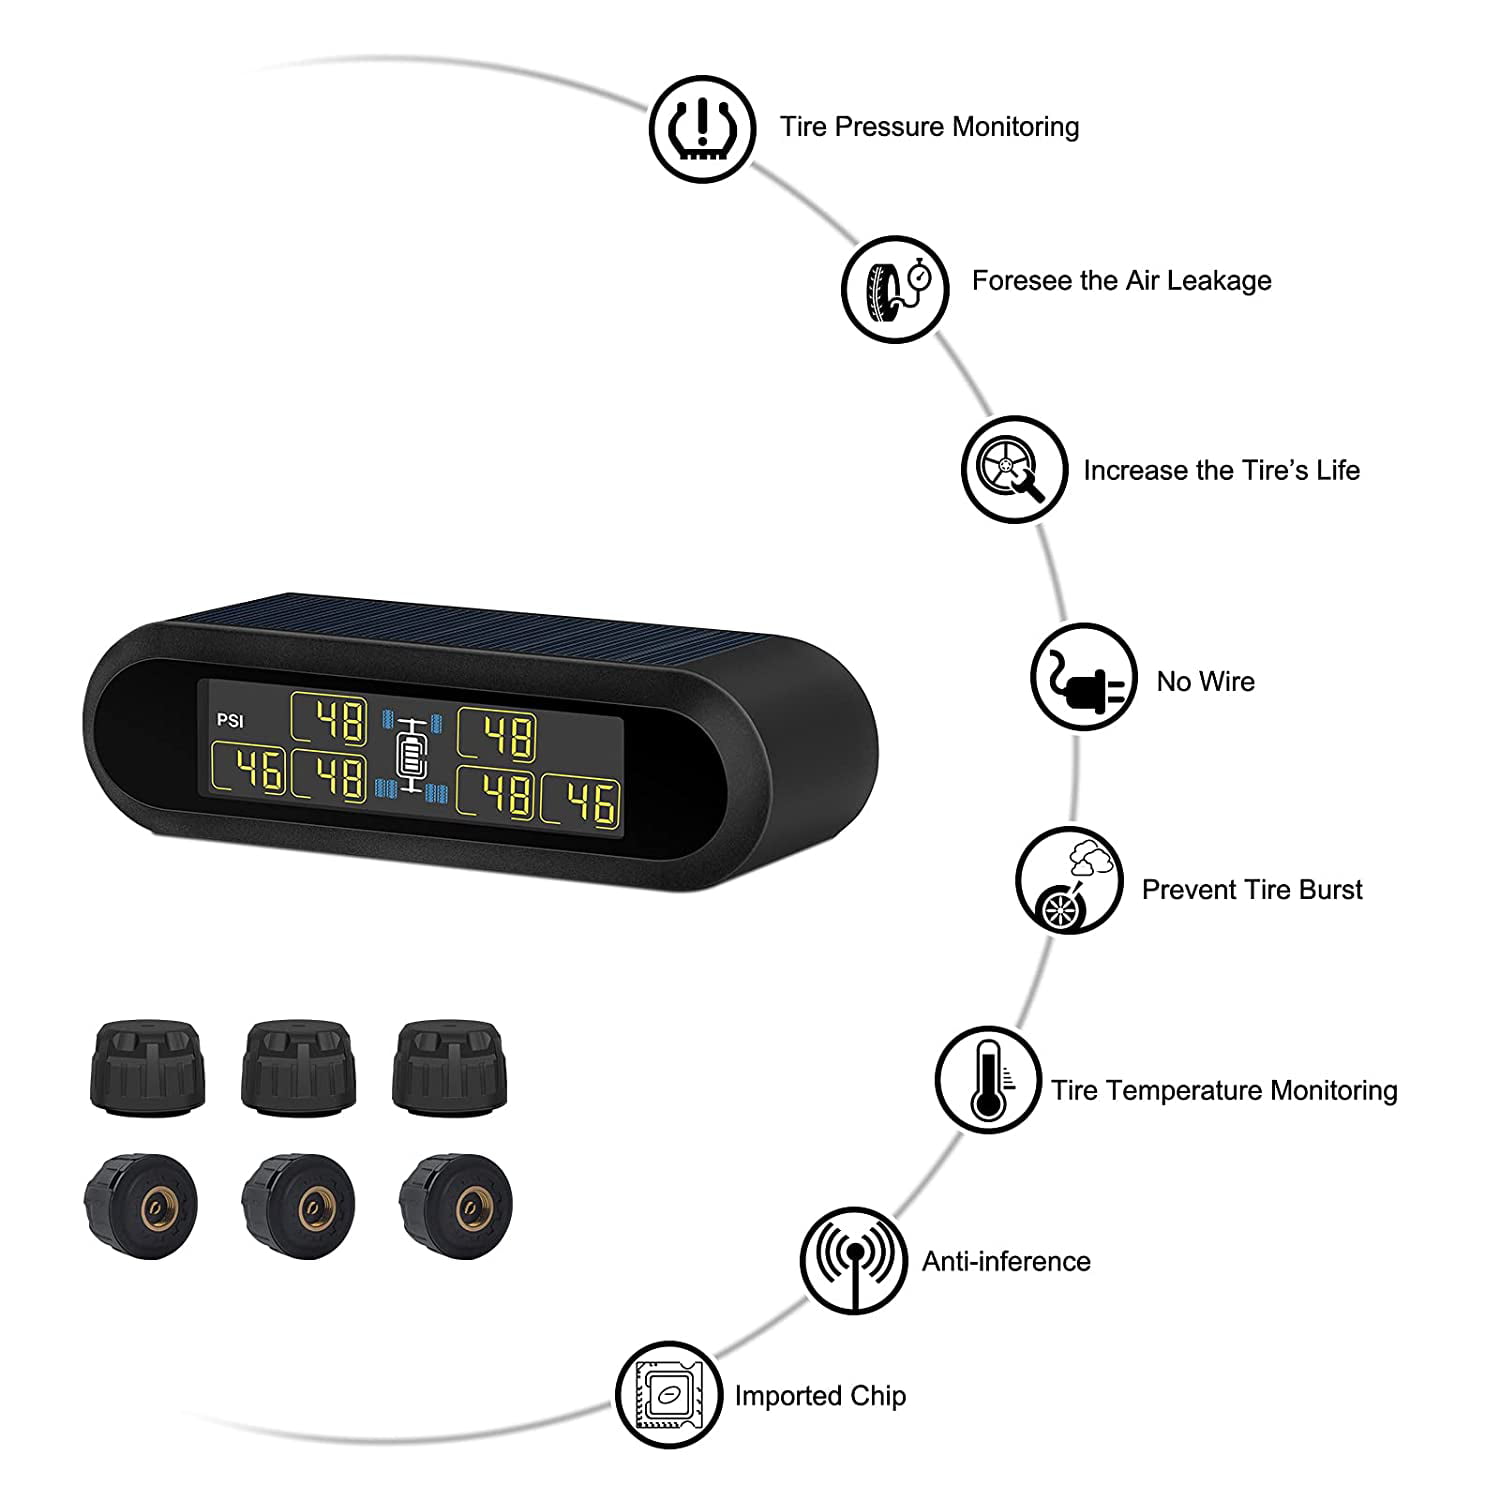 6 Alarm Function and Real-time Display Tire Pressure and Temperature. with 6 Tire Pressure Sensors B-Qtech Tire Pressure Monitoring System for RV Trailer Solar/USB Charging TPMS Wireless Monitor 